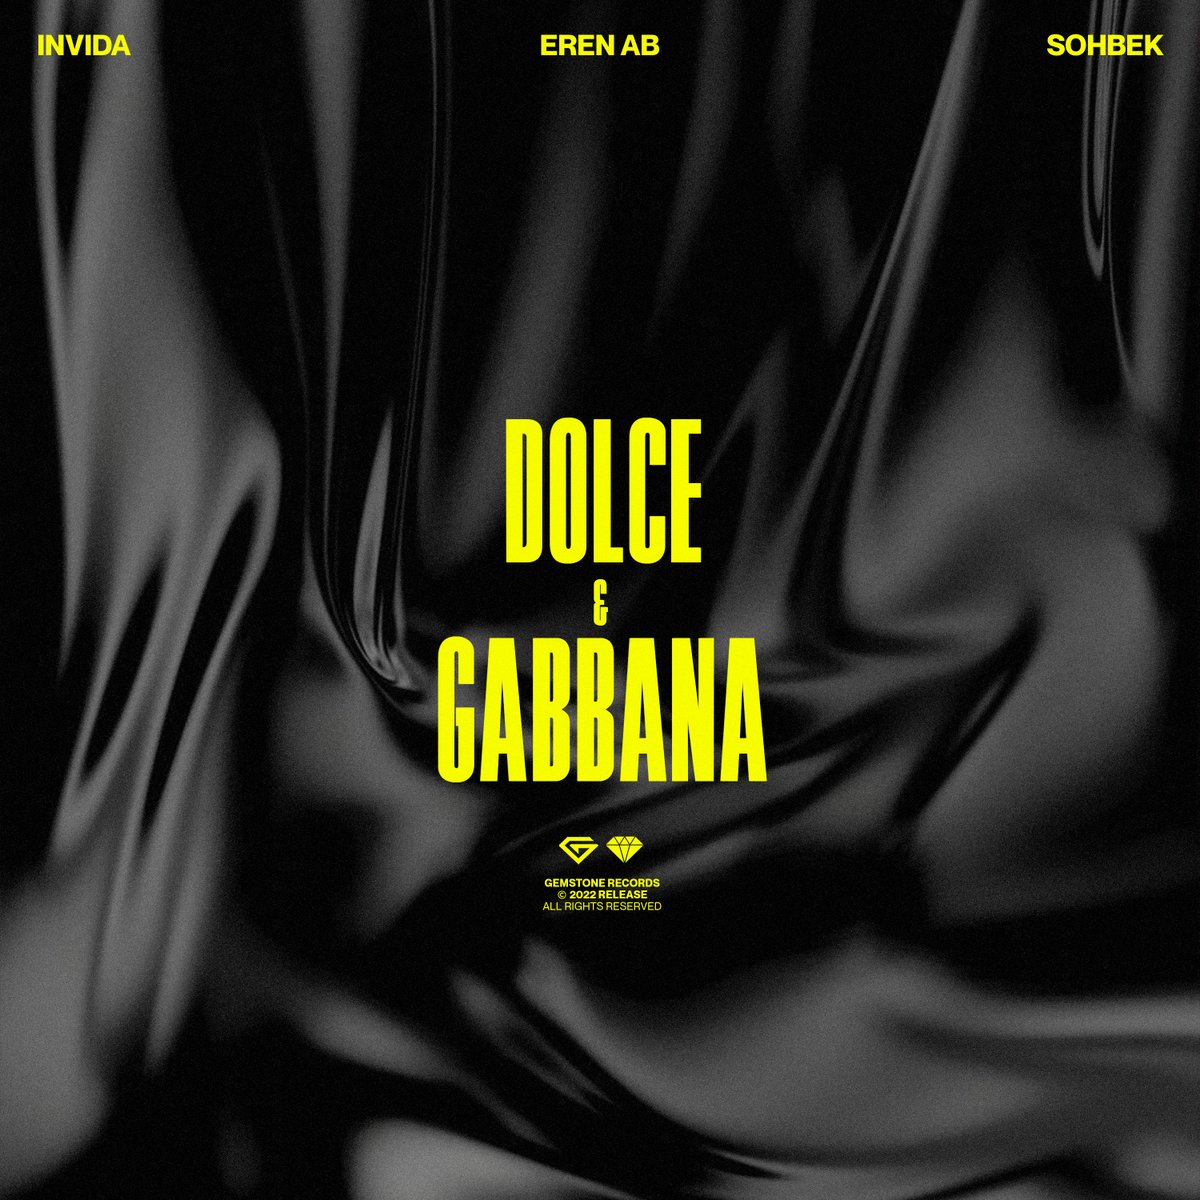 We’ve got a shining gem coming to you this Friday! @invidamusic, @ErenAB & Sohbek are ready to drop Dolce & Gabbana💎revr.ec/DOLCE-GABBANA